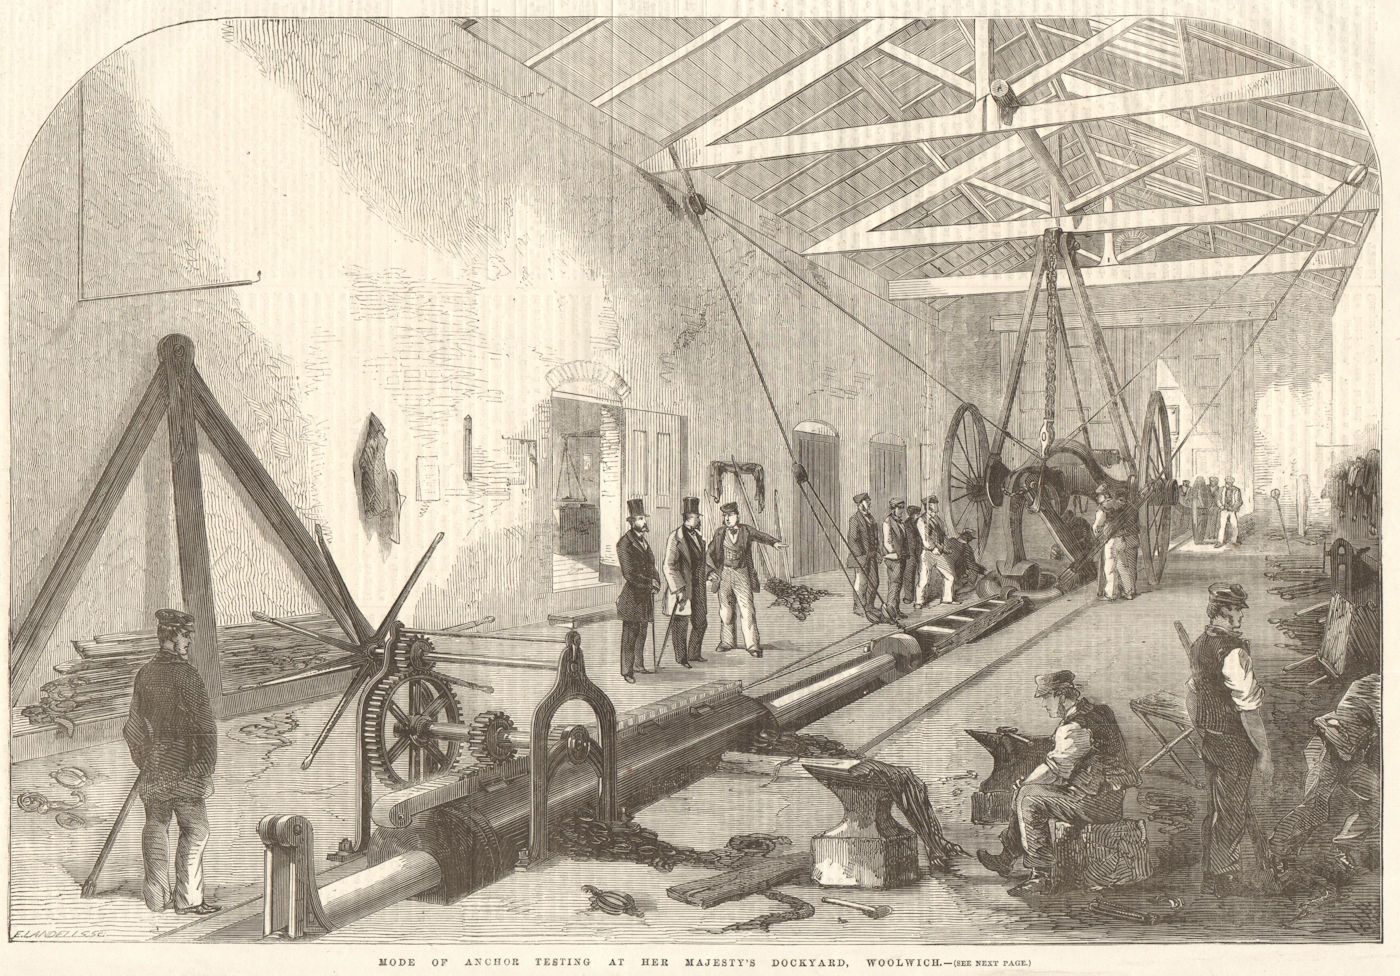 Anchor testing at Her Majesty's Dockyard, Woolwich. London. Engineering 1857